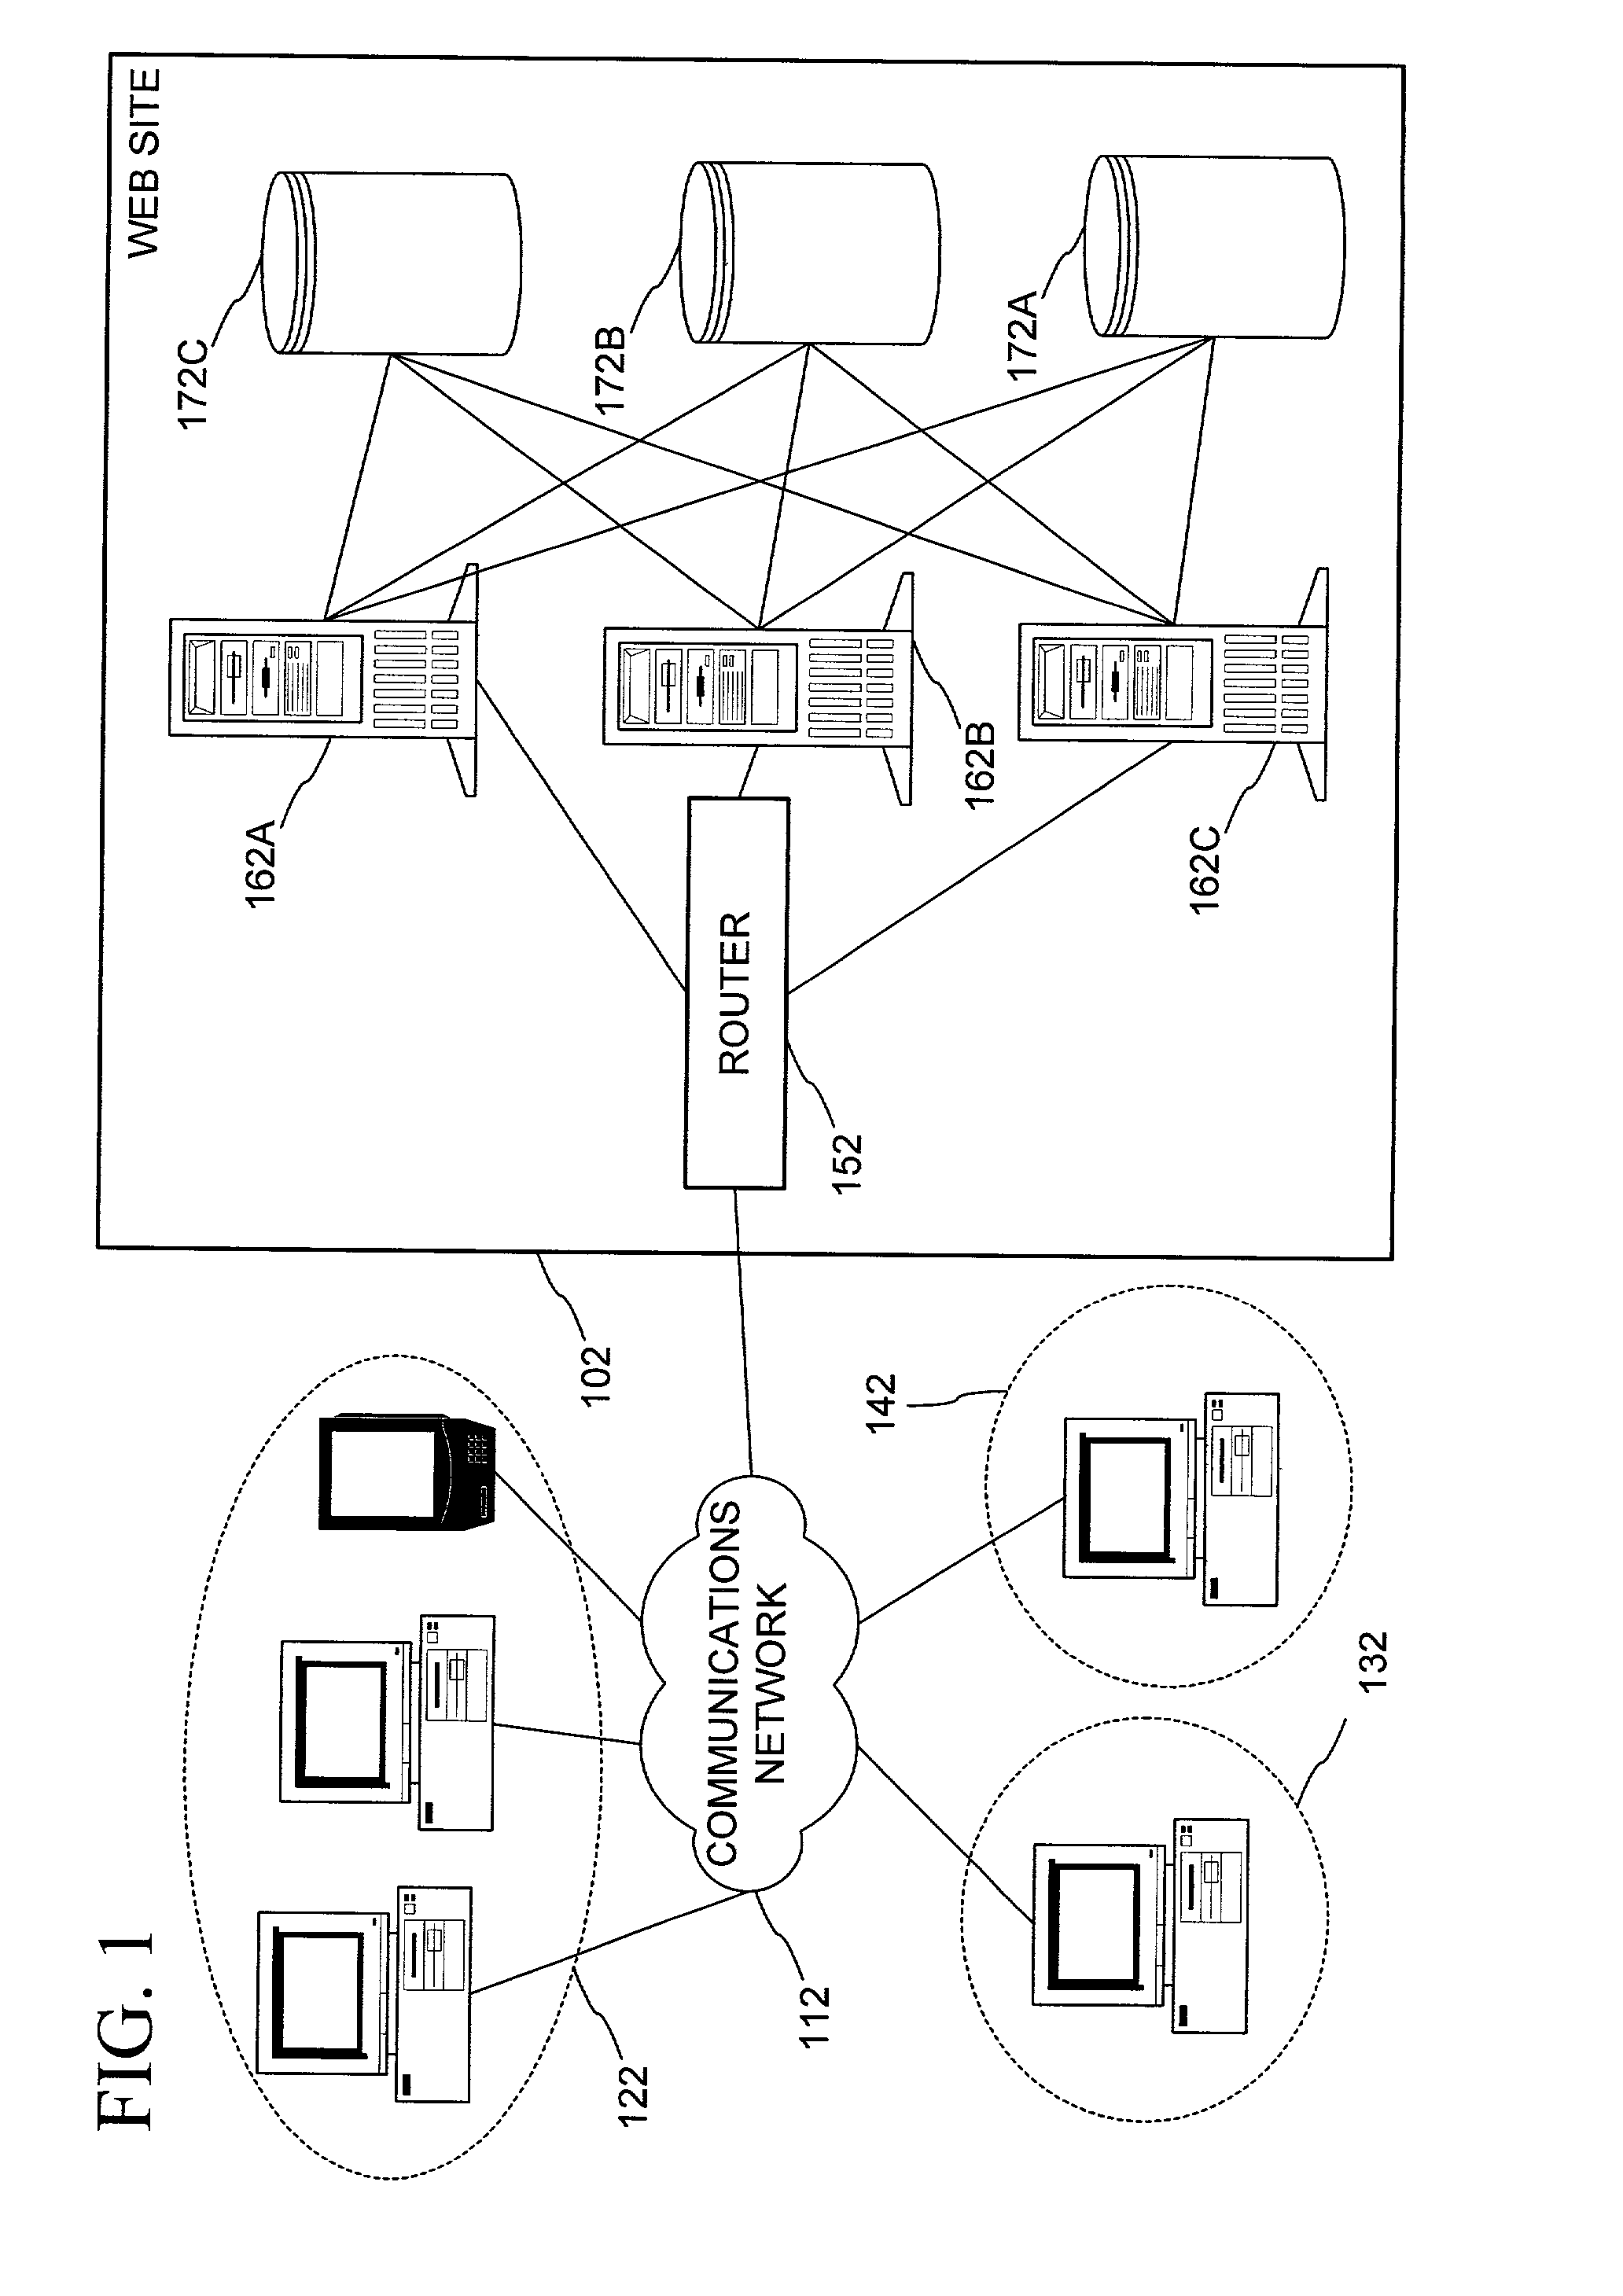 Genomic profile information systems and methods